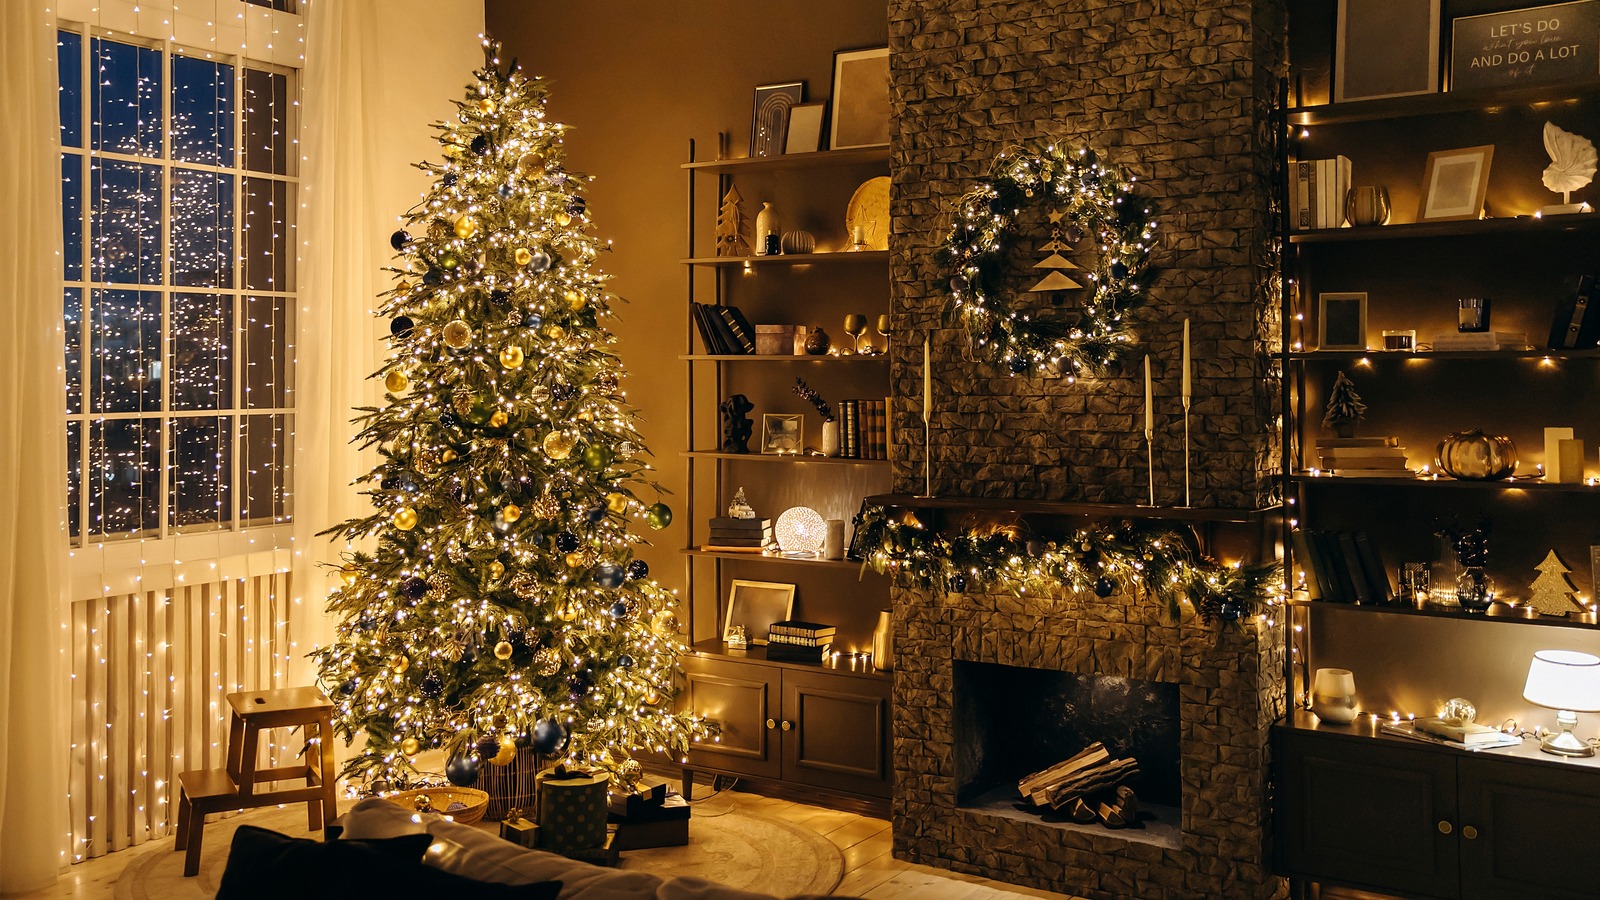 20 Festive Lighting Ideas To Help Set The Mood For The Holidays